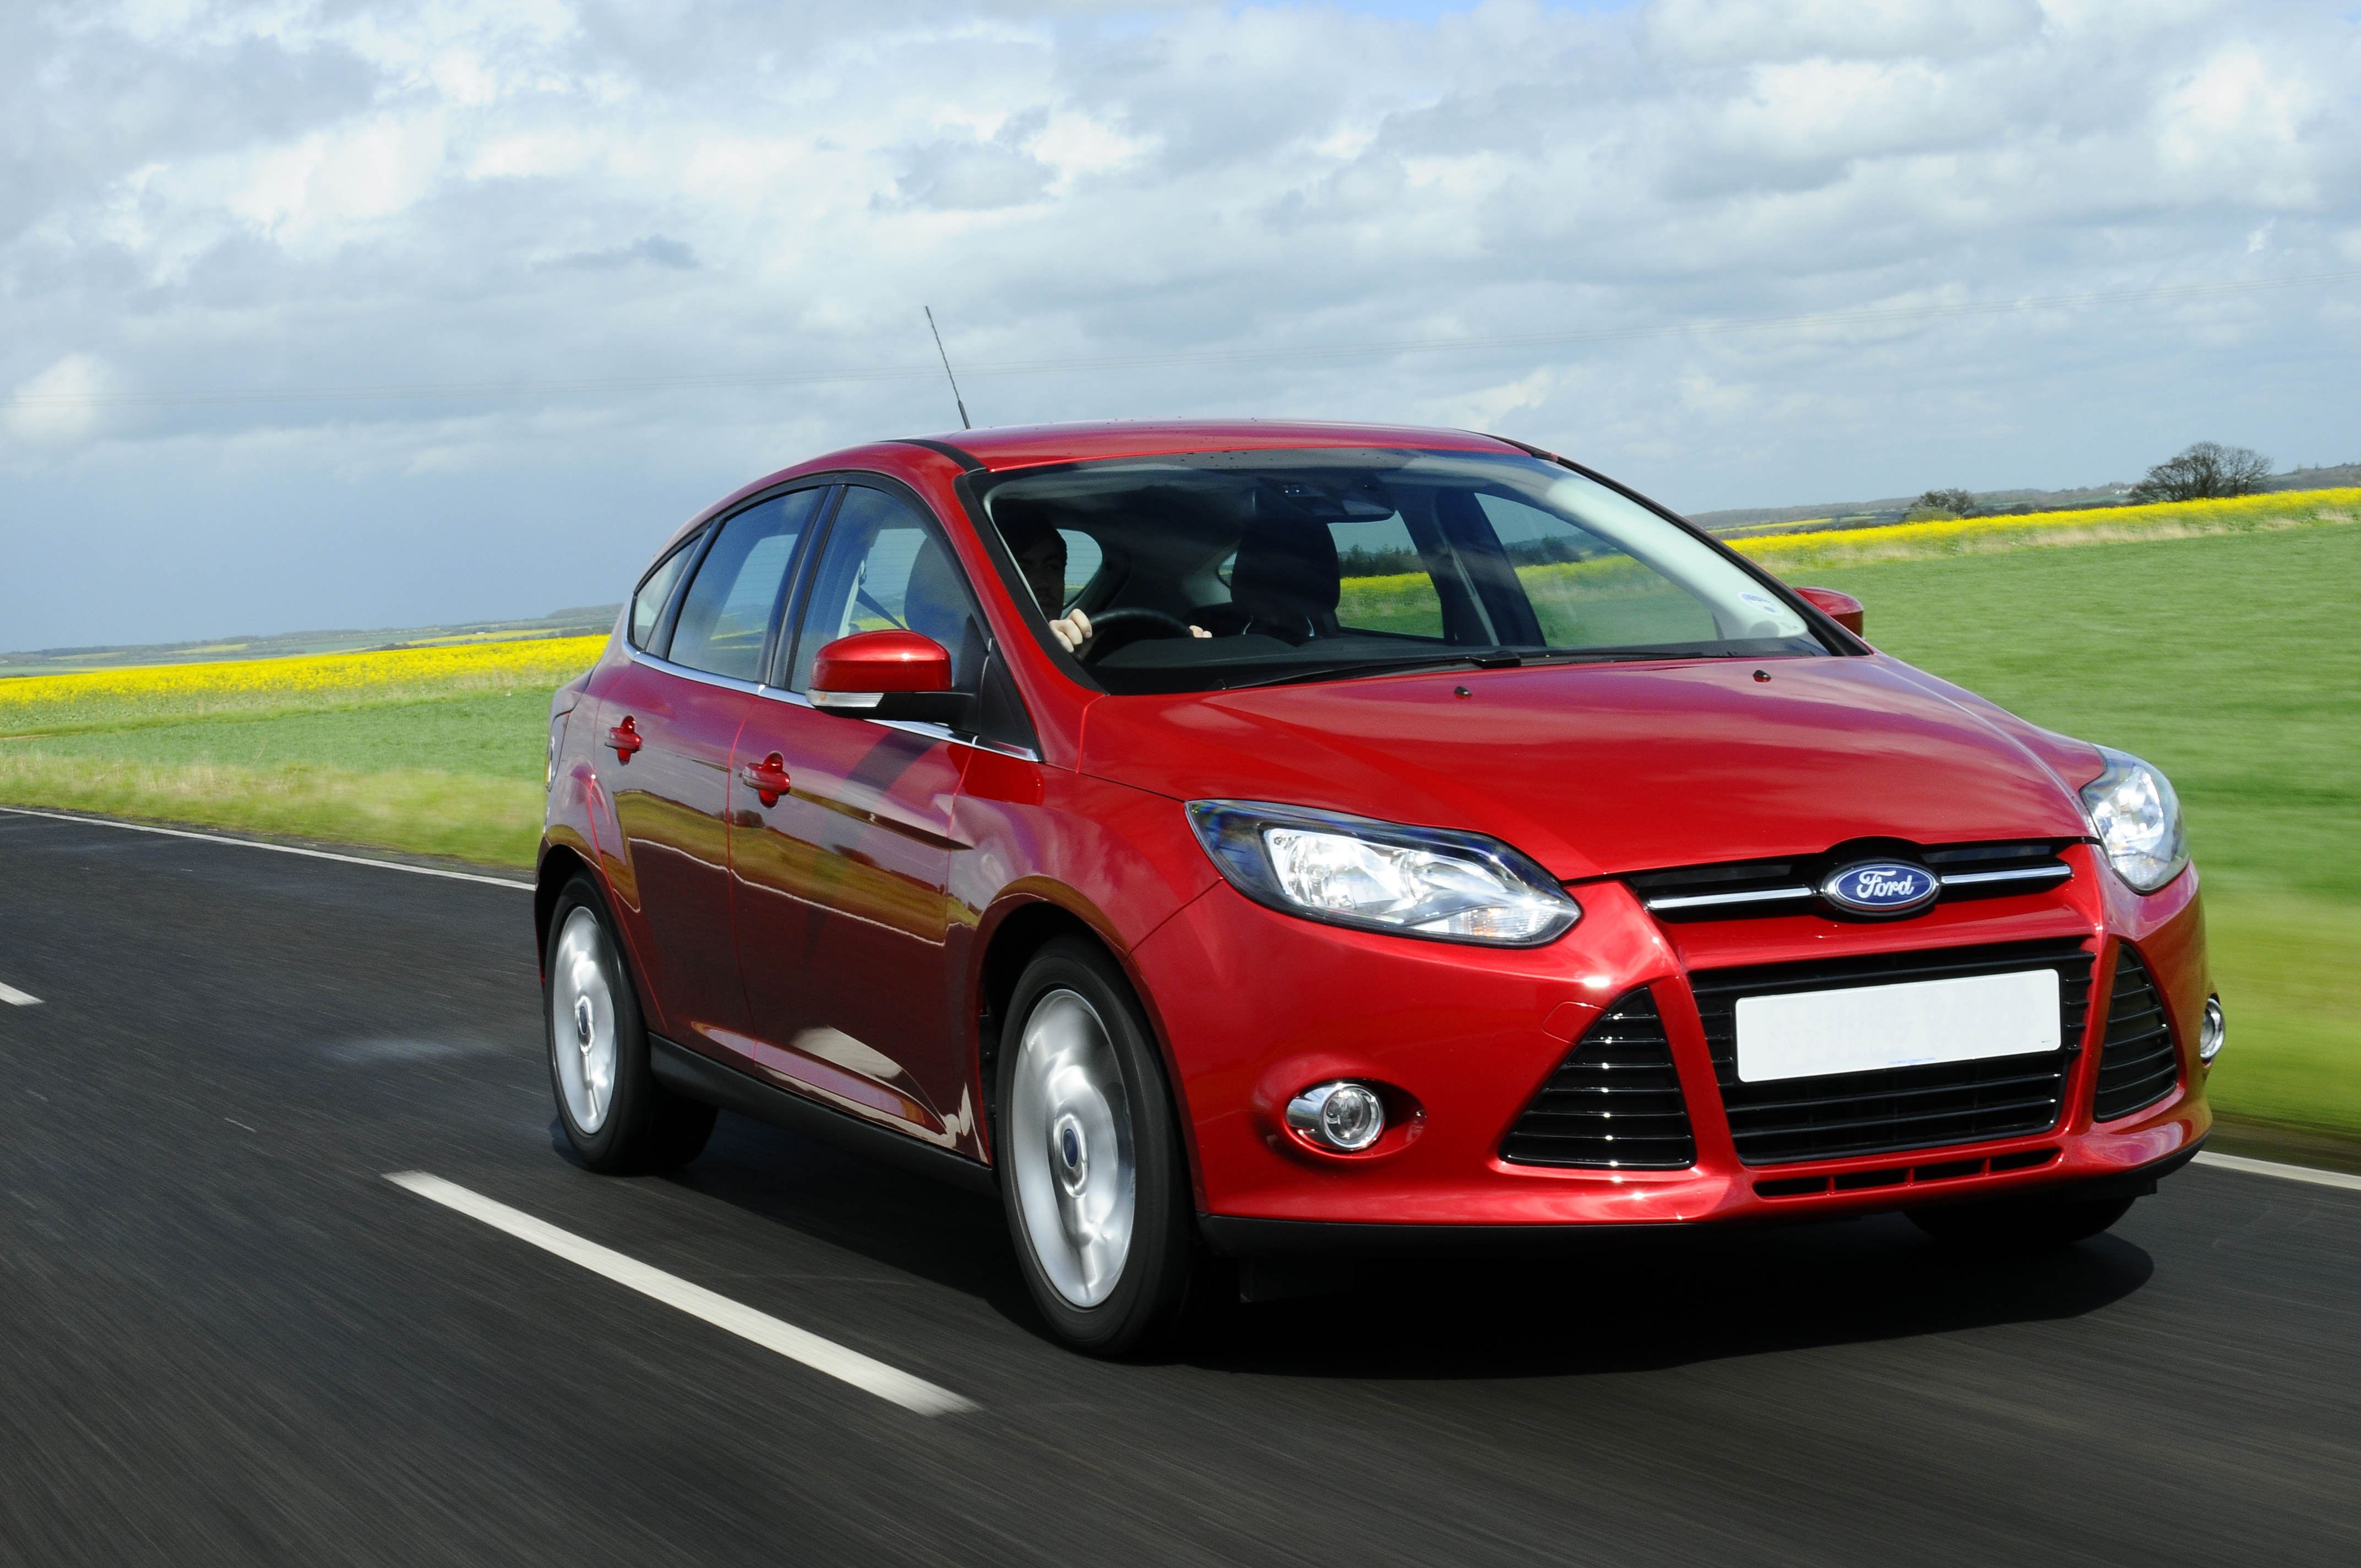 Форд фокус 125 лс. Ford Focus 1.0. Ford Focus ECOBOOST. Форд фокус 1.0 ECOBOOST. Ford ECOBOOST 1.0.